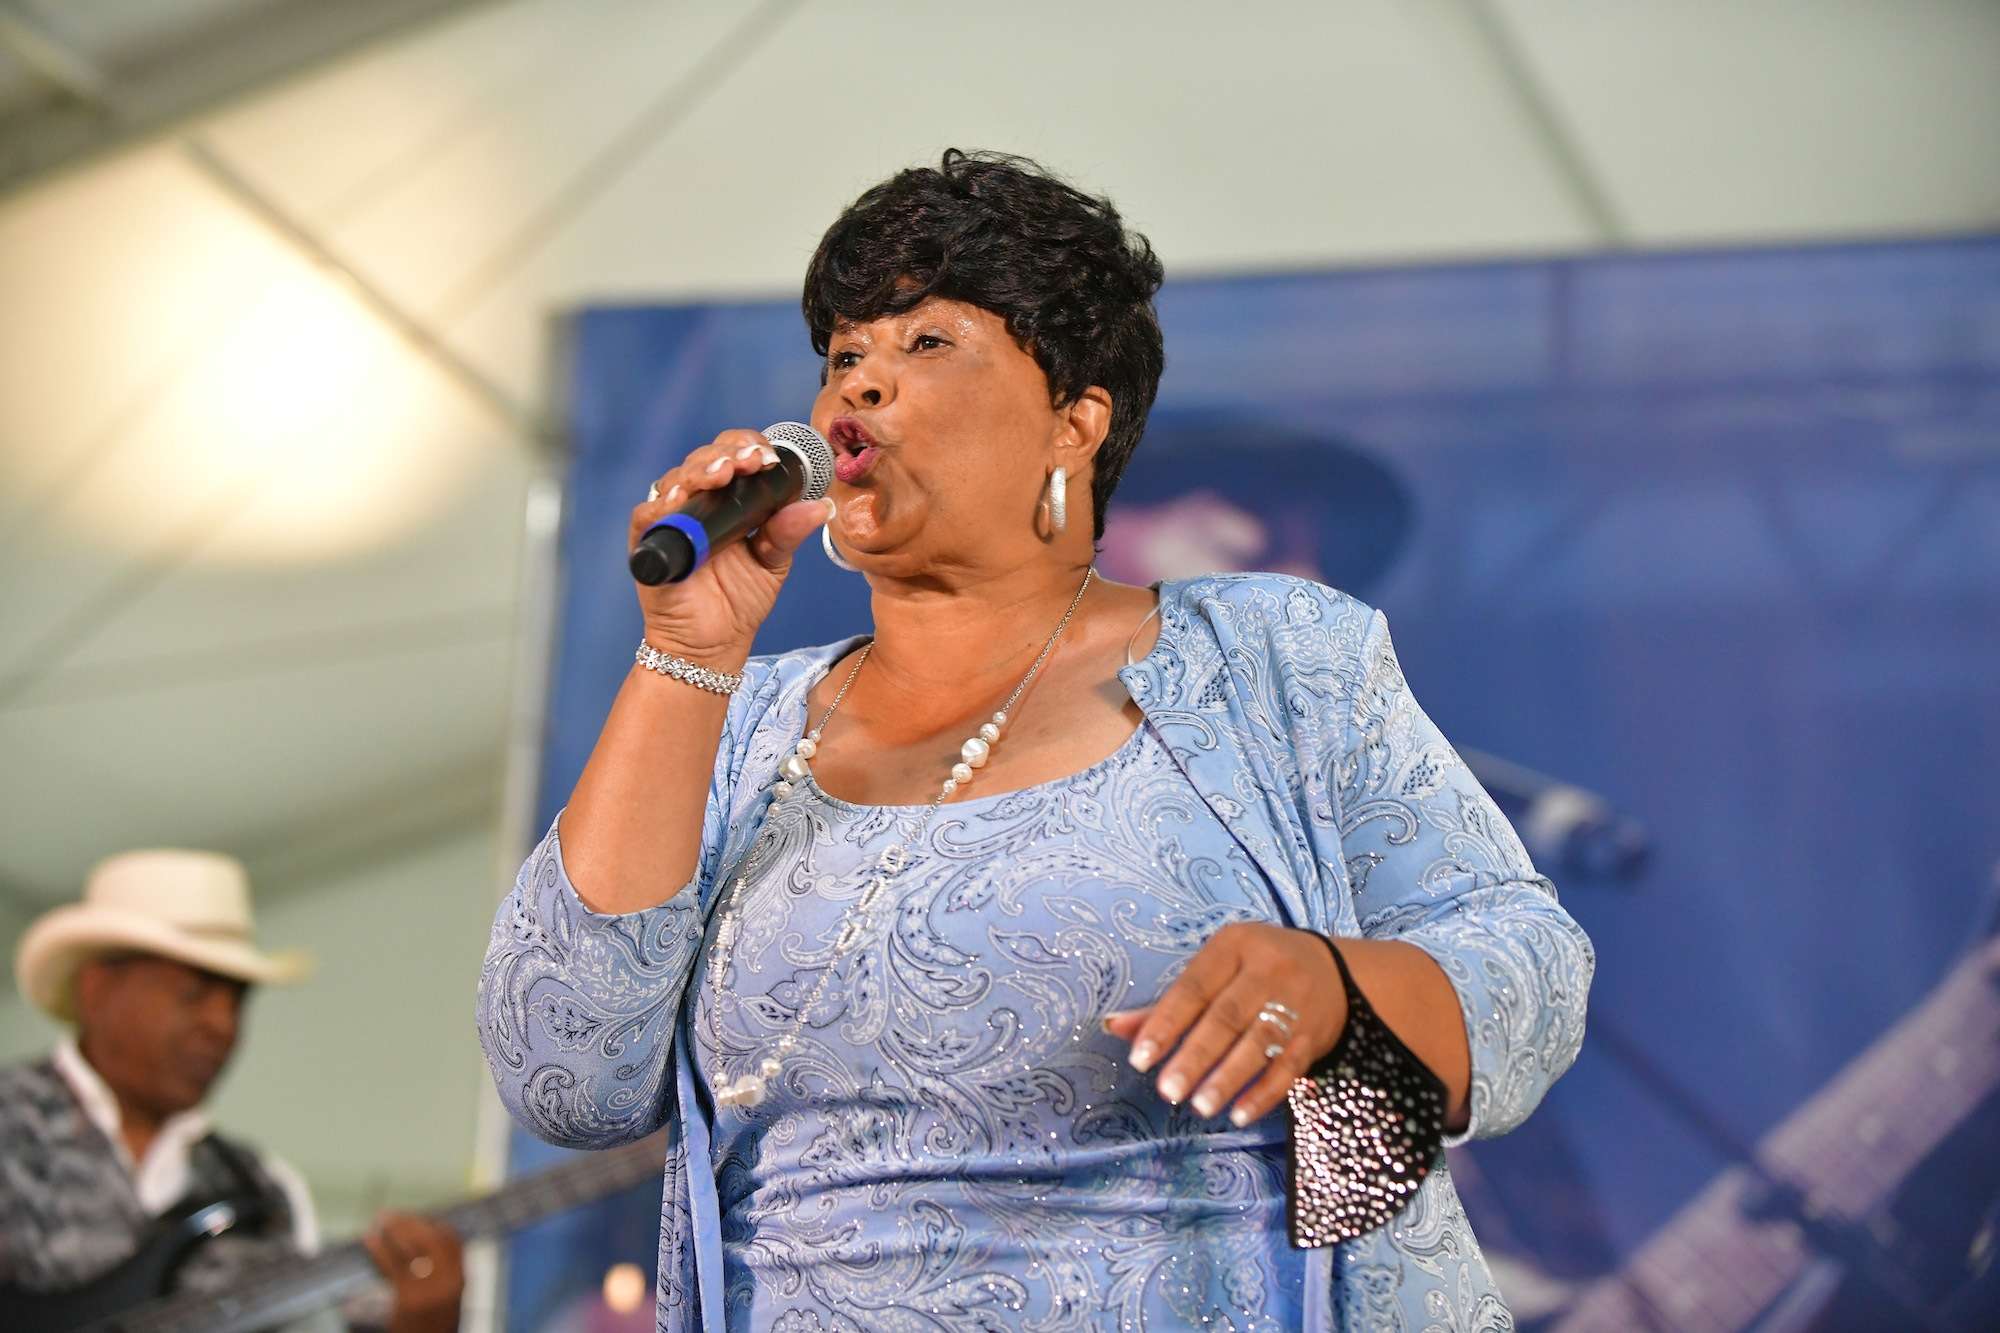 Ms Jody Live At Chicago Blues Fest [GALLERY] 5